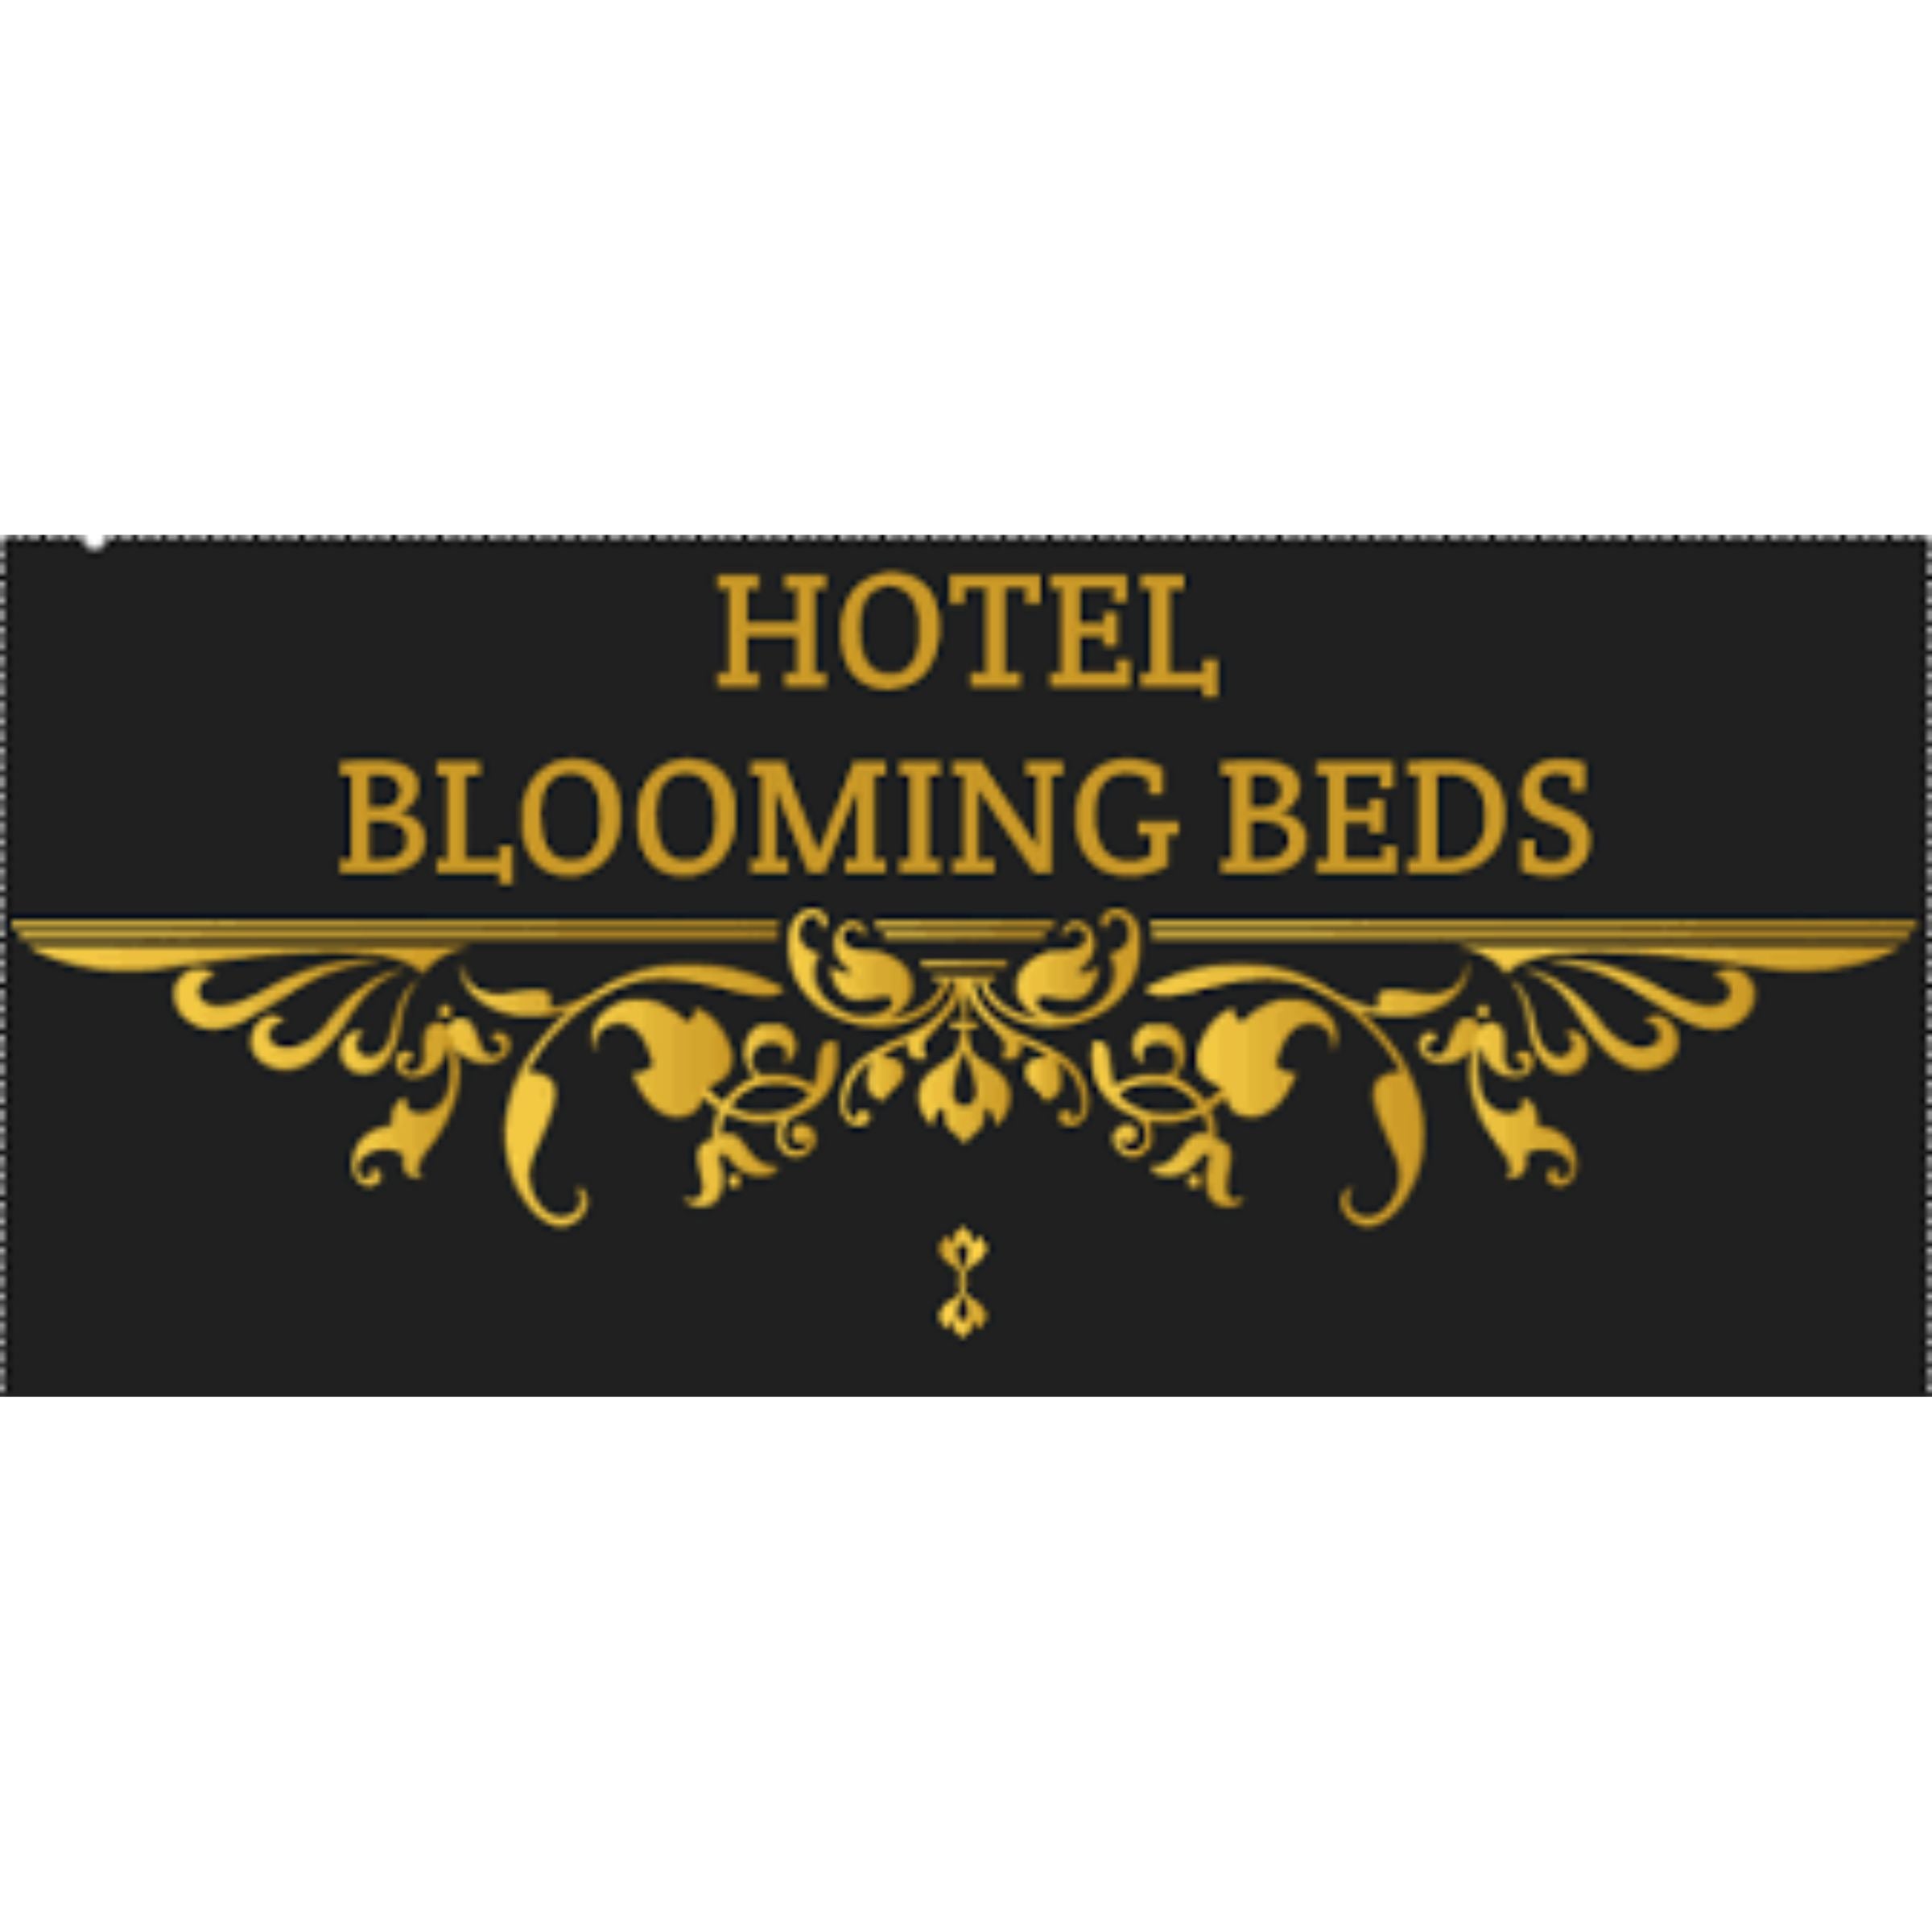 Hotel Blooming Beds Logo